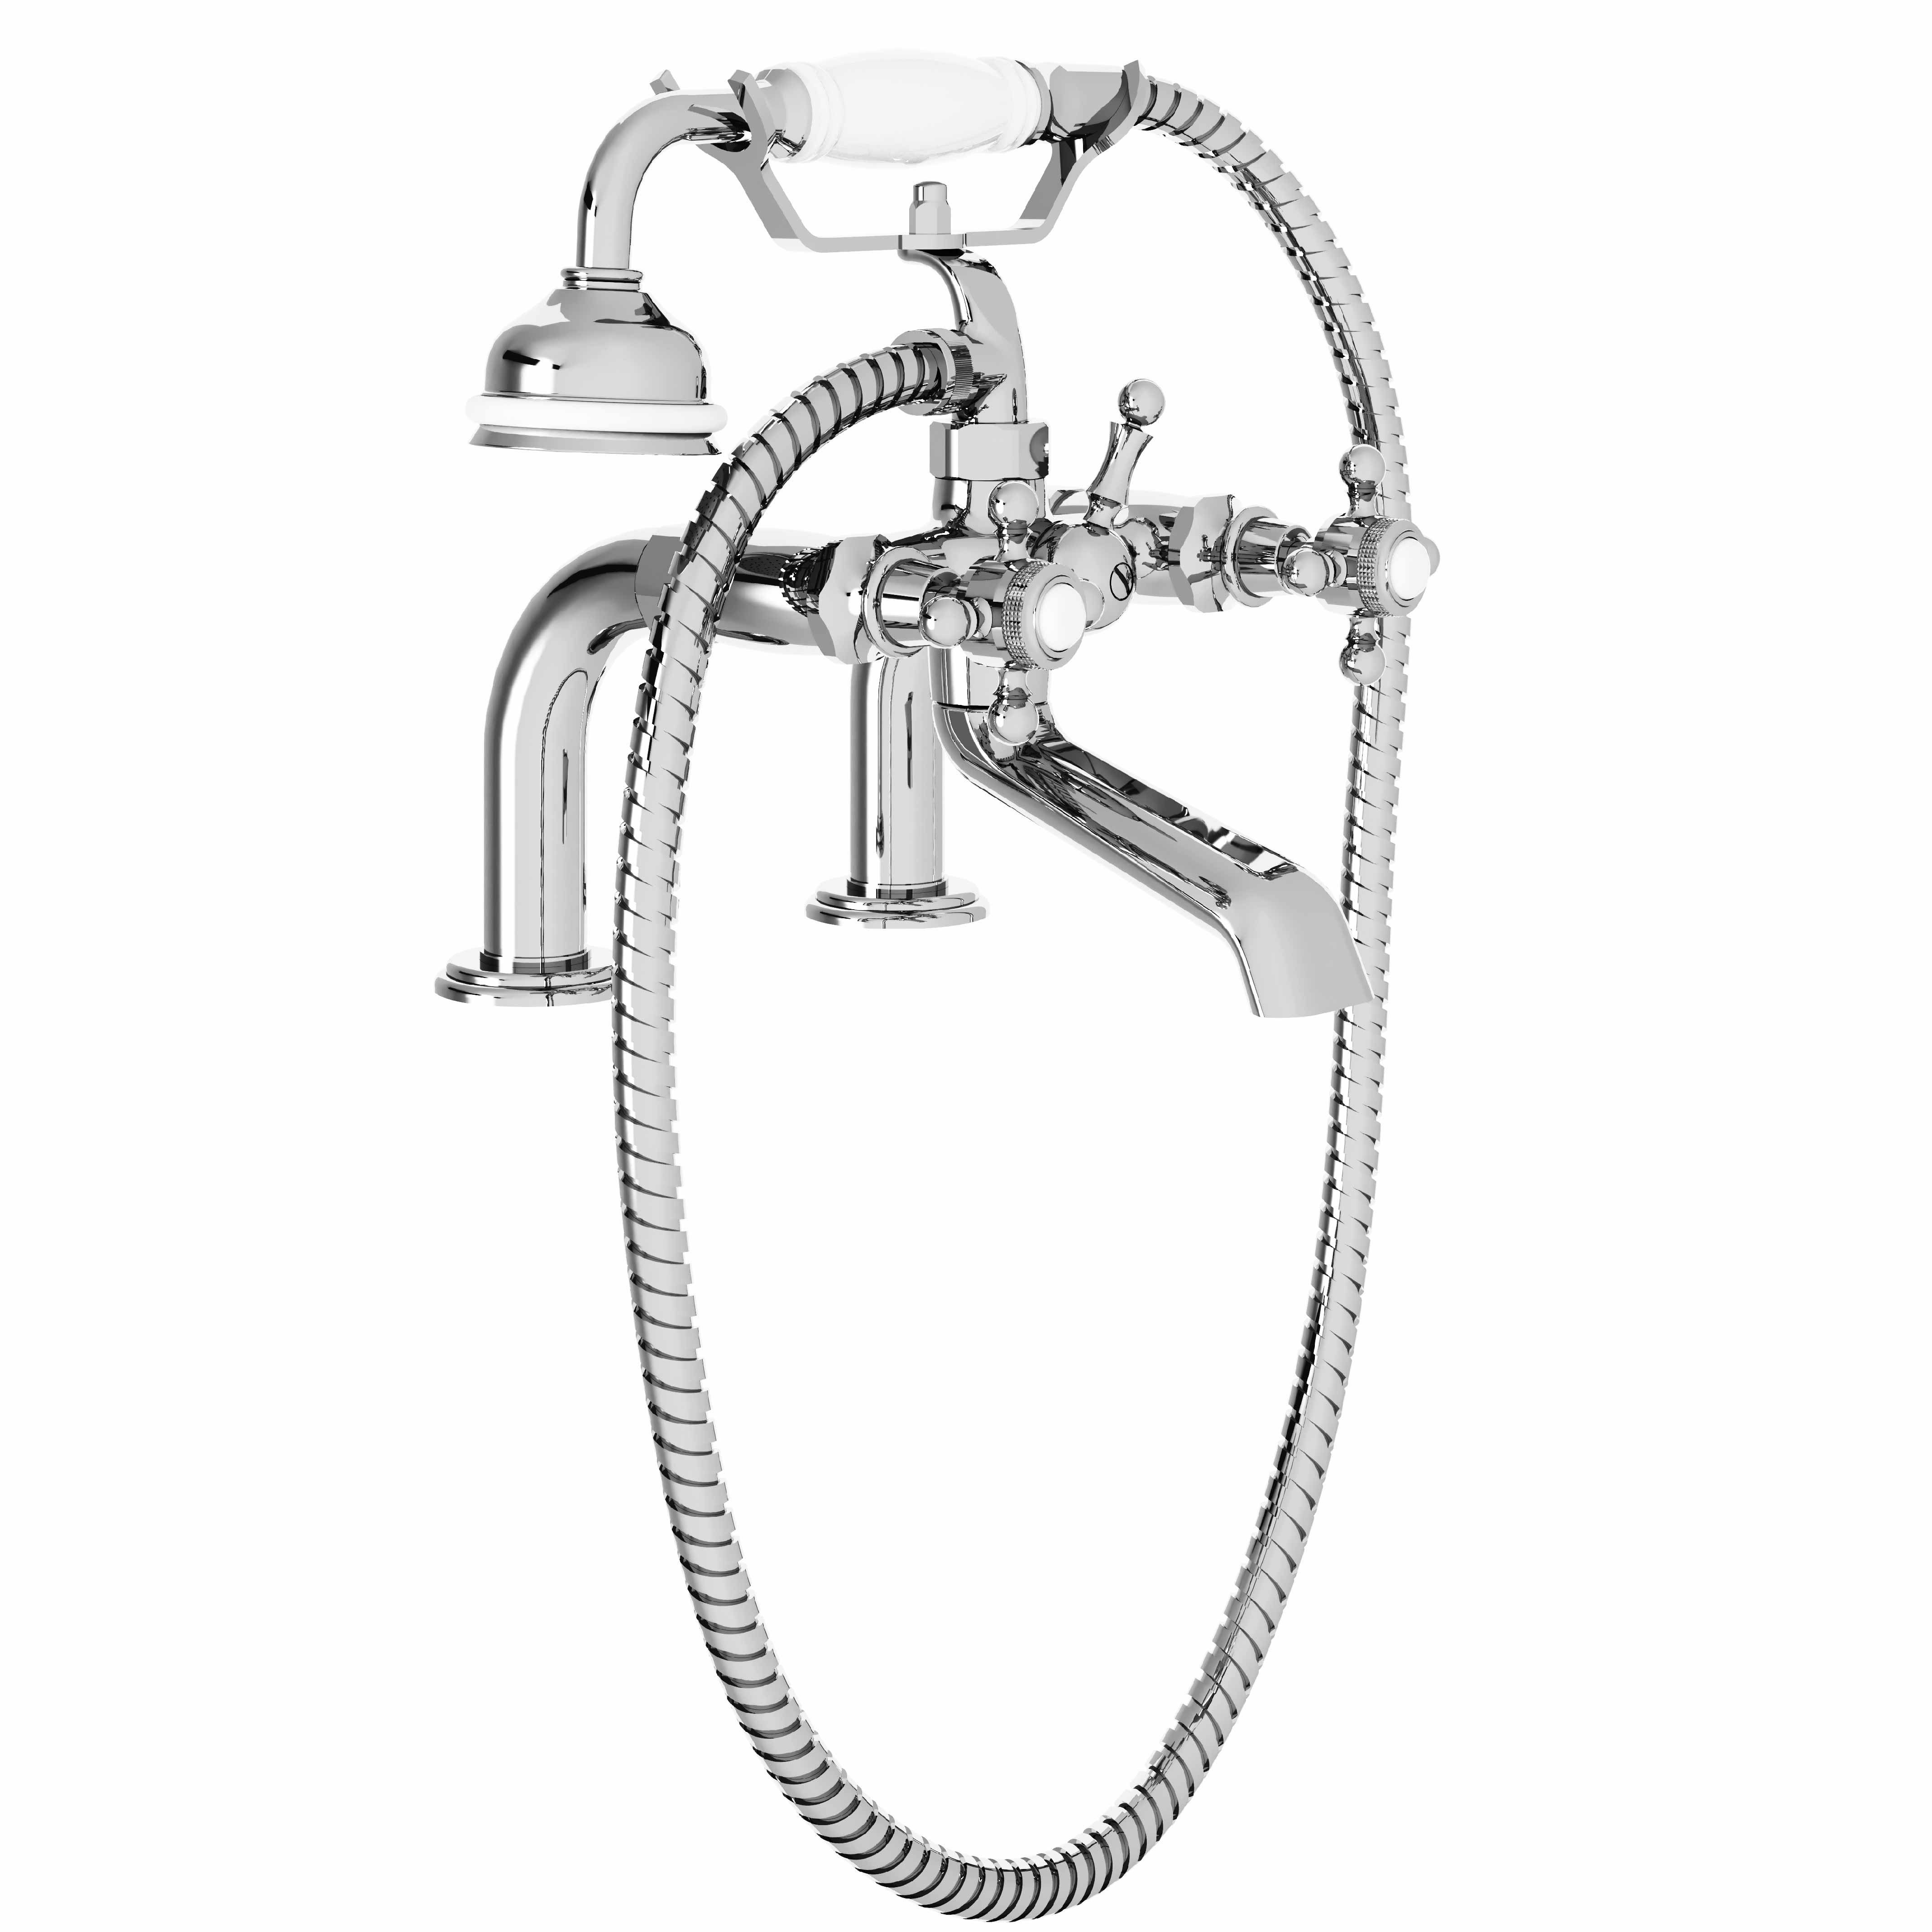 M20-3306 Rim mounted bath and shower mixer